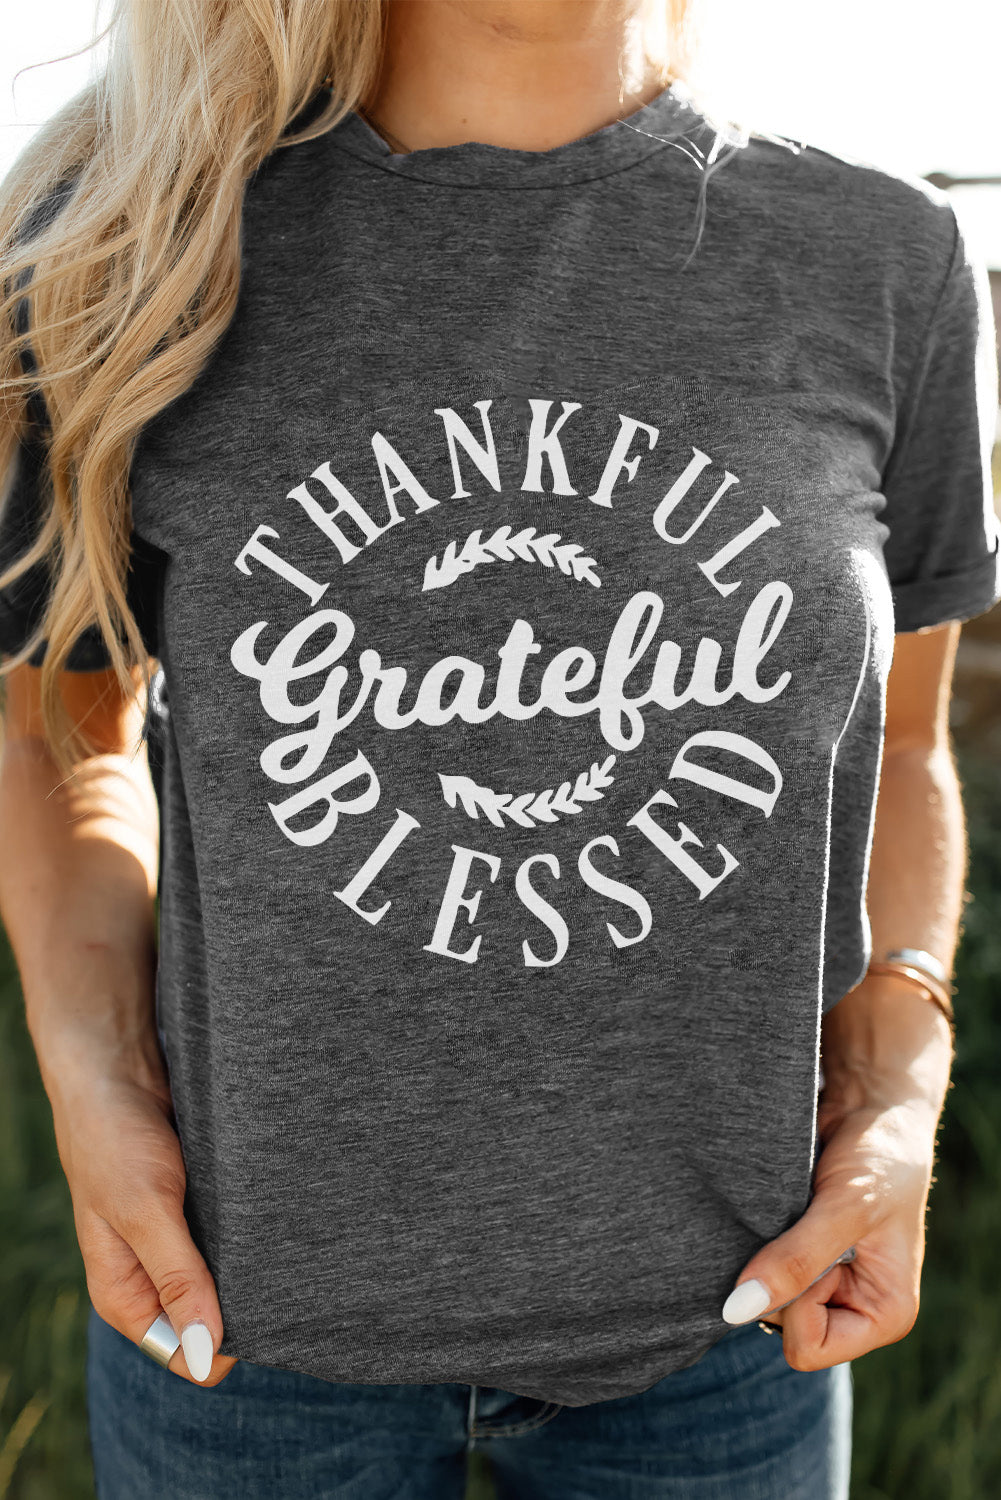 THANKFUL GRATEFUL BLESSED Graphic Crewneck Tee  | KIKI COUTURE-Women's Clothing, Designer Fashions, Shoes, Bags